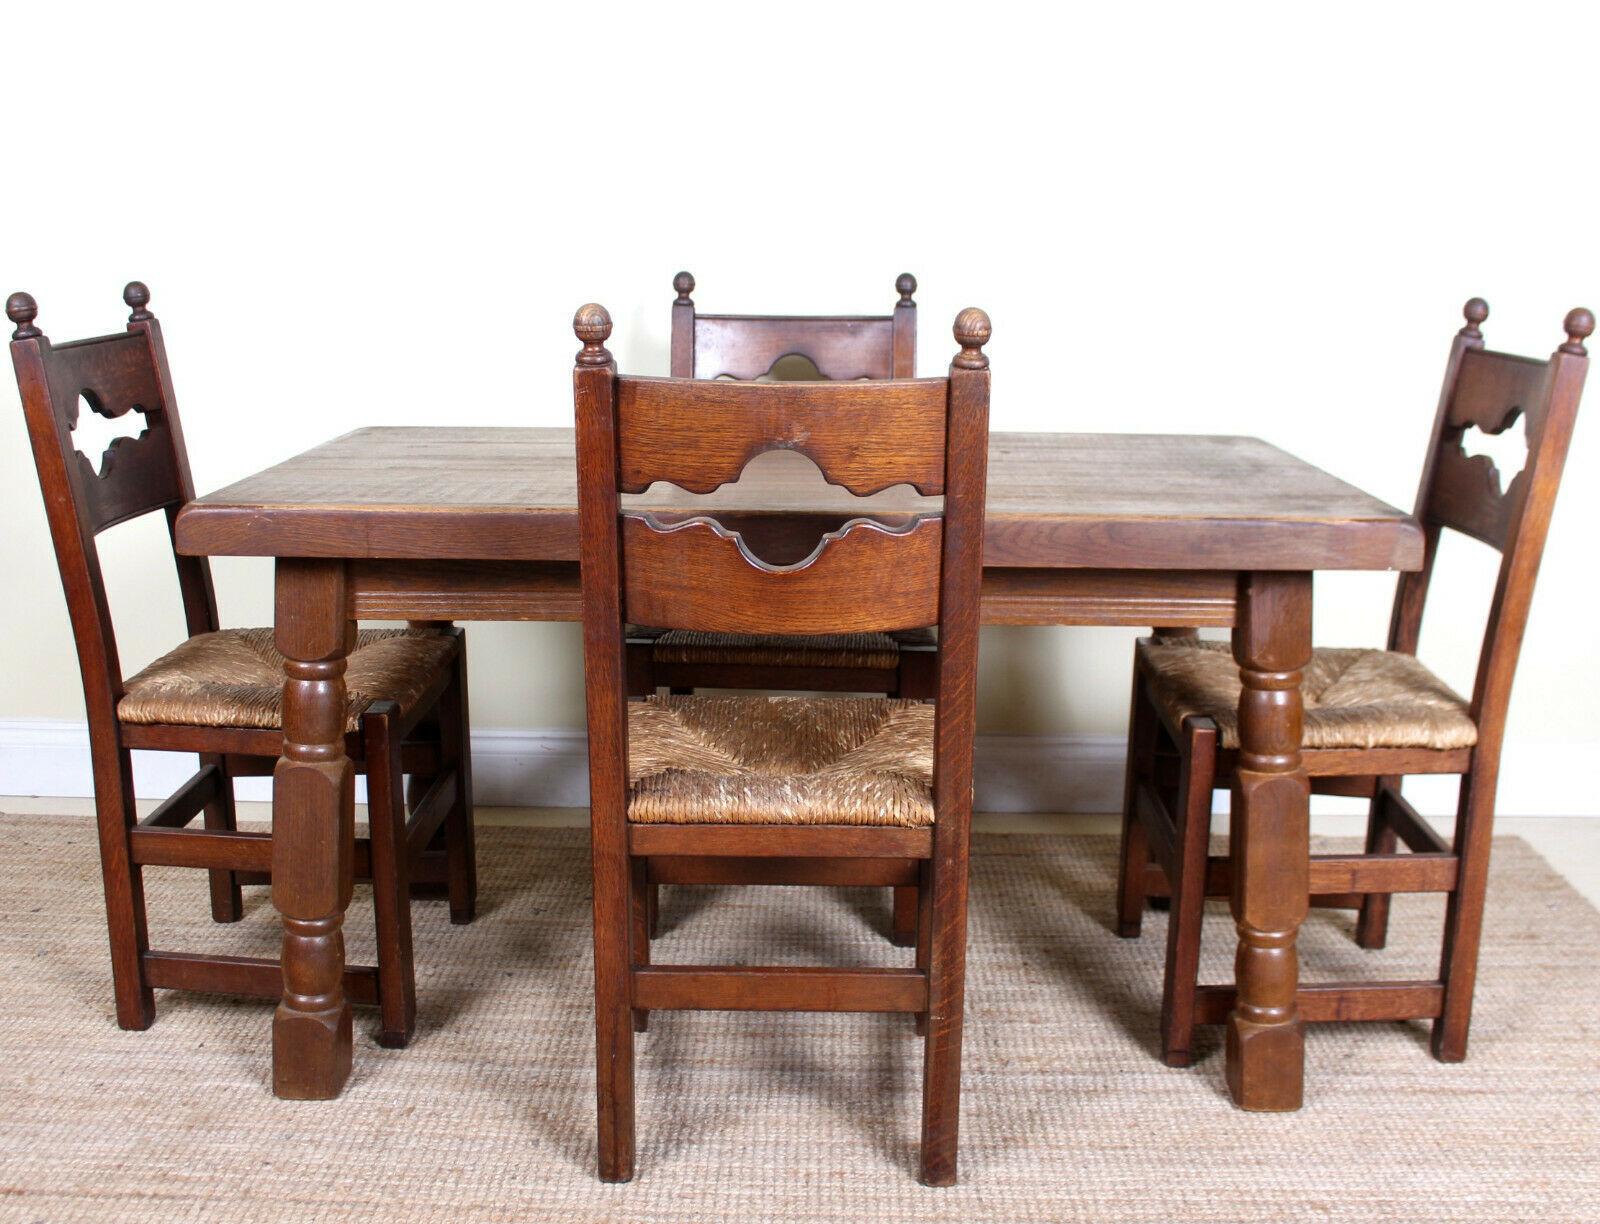 An impressive antique five-piece oak dining suite.
Constructed from thick cuts of oak boasting a well figured grain.
The chairs constructed from solid oak with rushwork seats.
The table legs can be unscrewed for ease of movement.